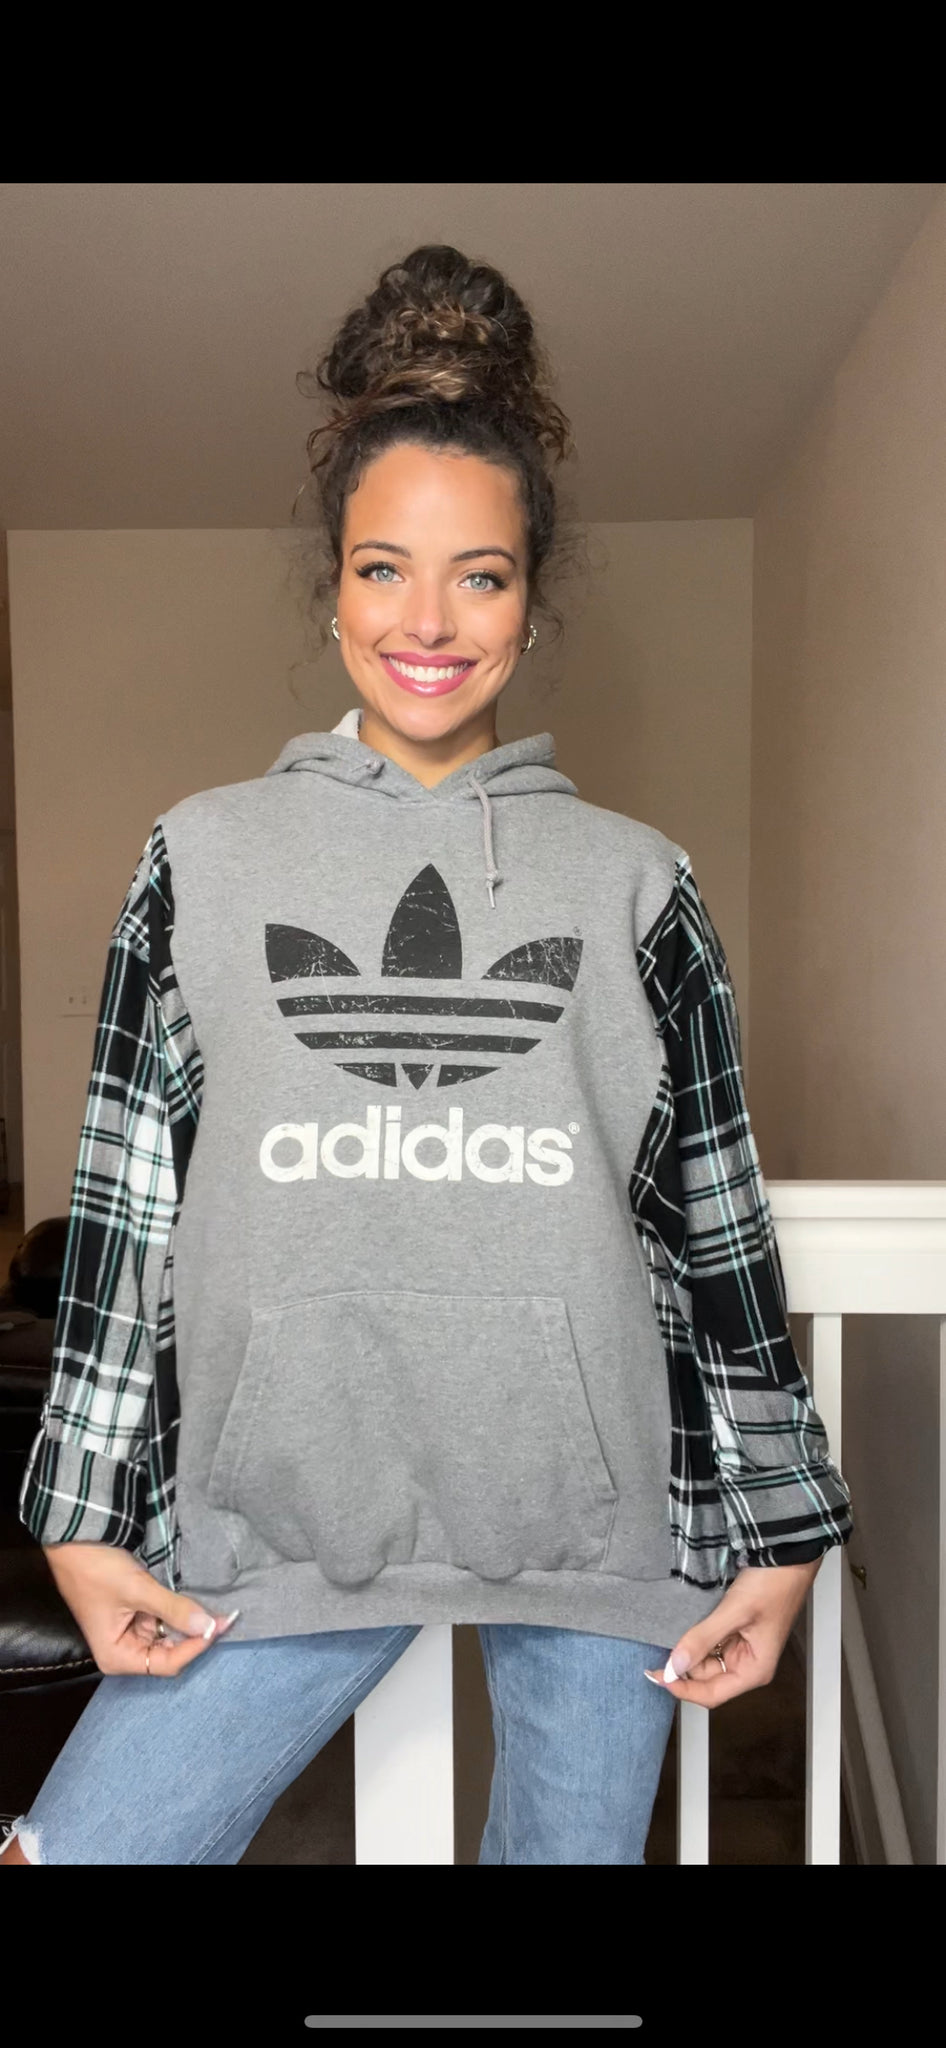 Adidas - woman’s XL/1X - thick sweatshirt with thin flannel sleeves ￼